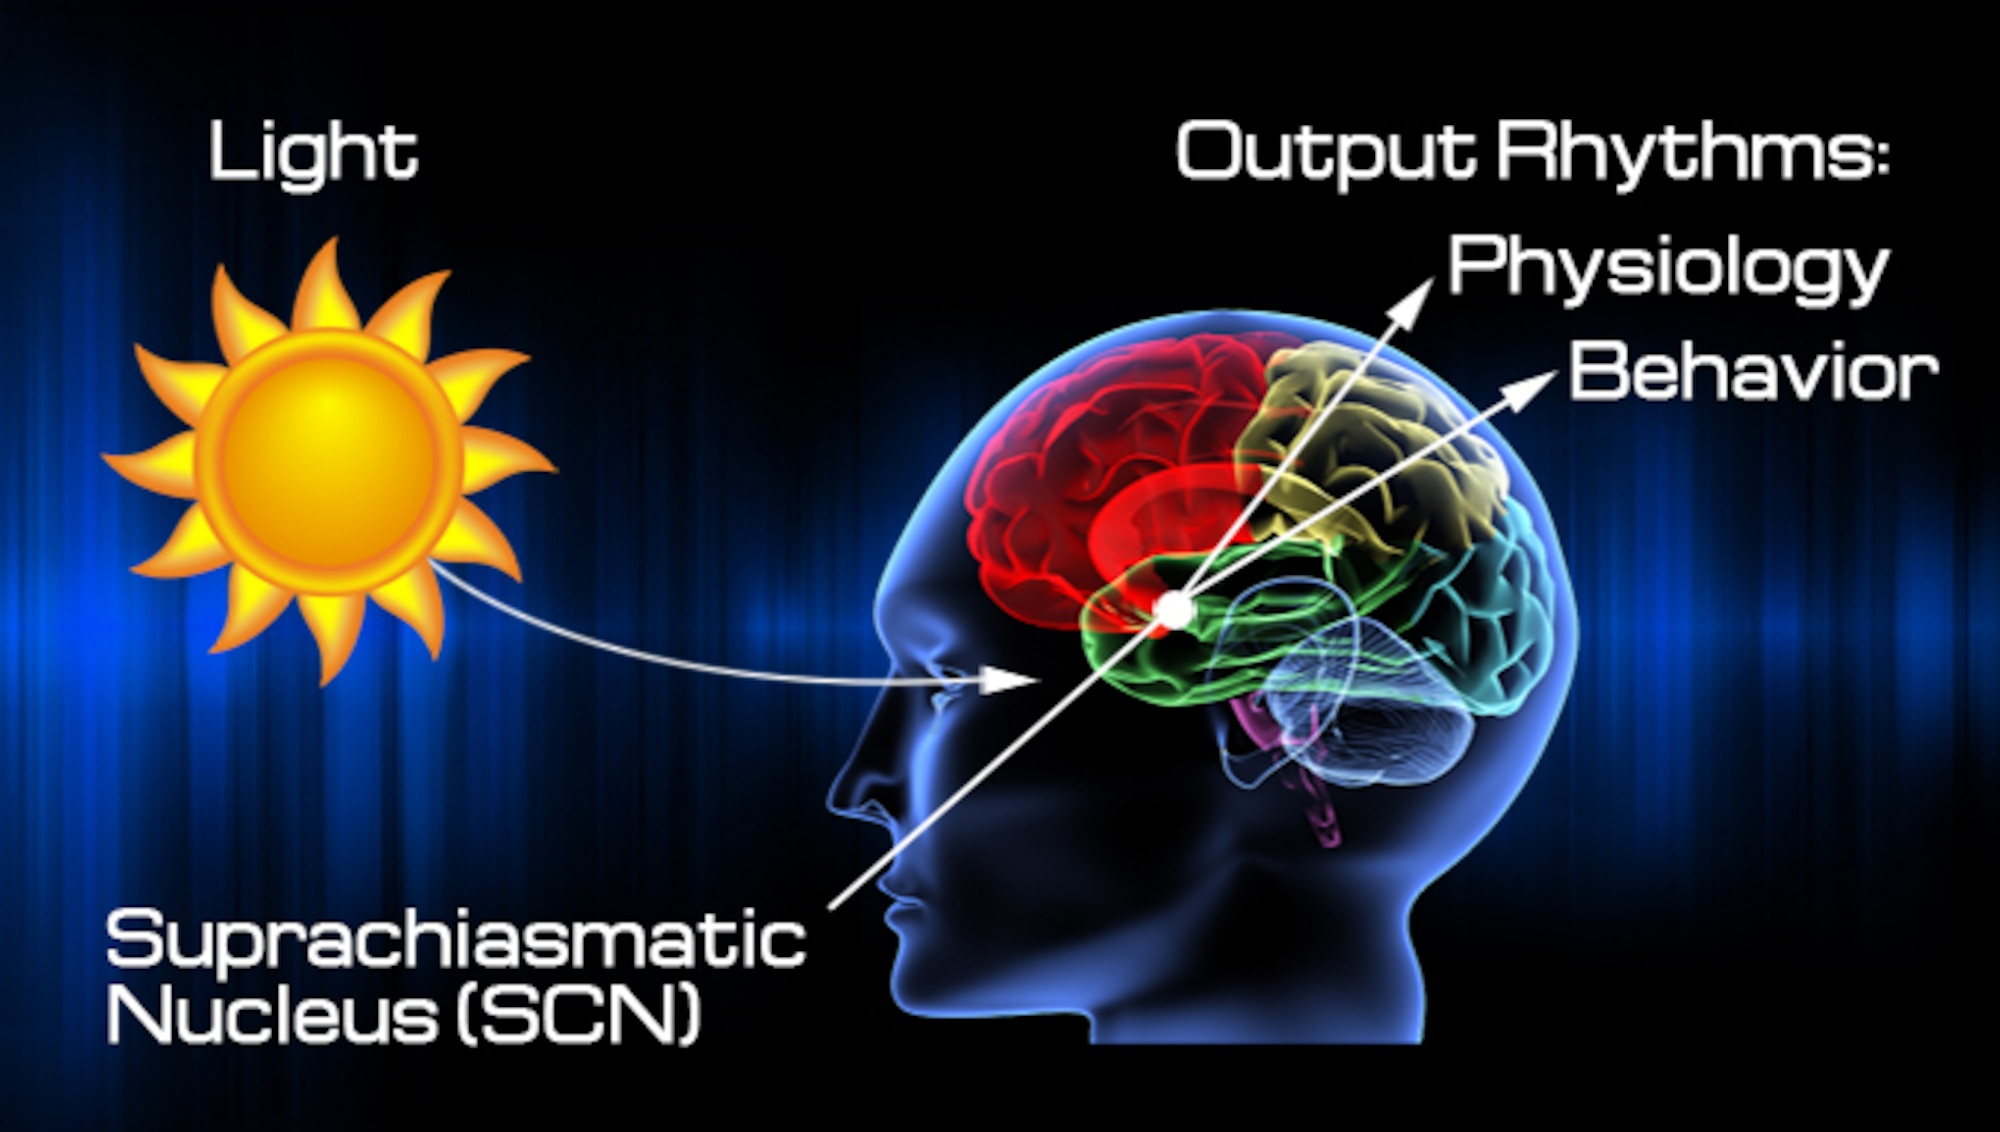 This diagram illustrates the influence of light and darkness on the circadian rhythm and related physiology and behavior through the suprachiasmatic nucleus in the brain. (Graphic courtesy of Steve Thompson, AFMS Public Affairs)